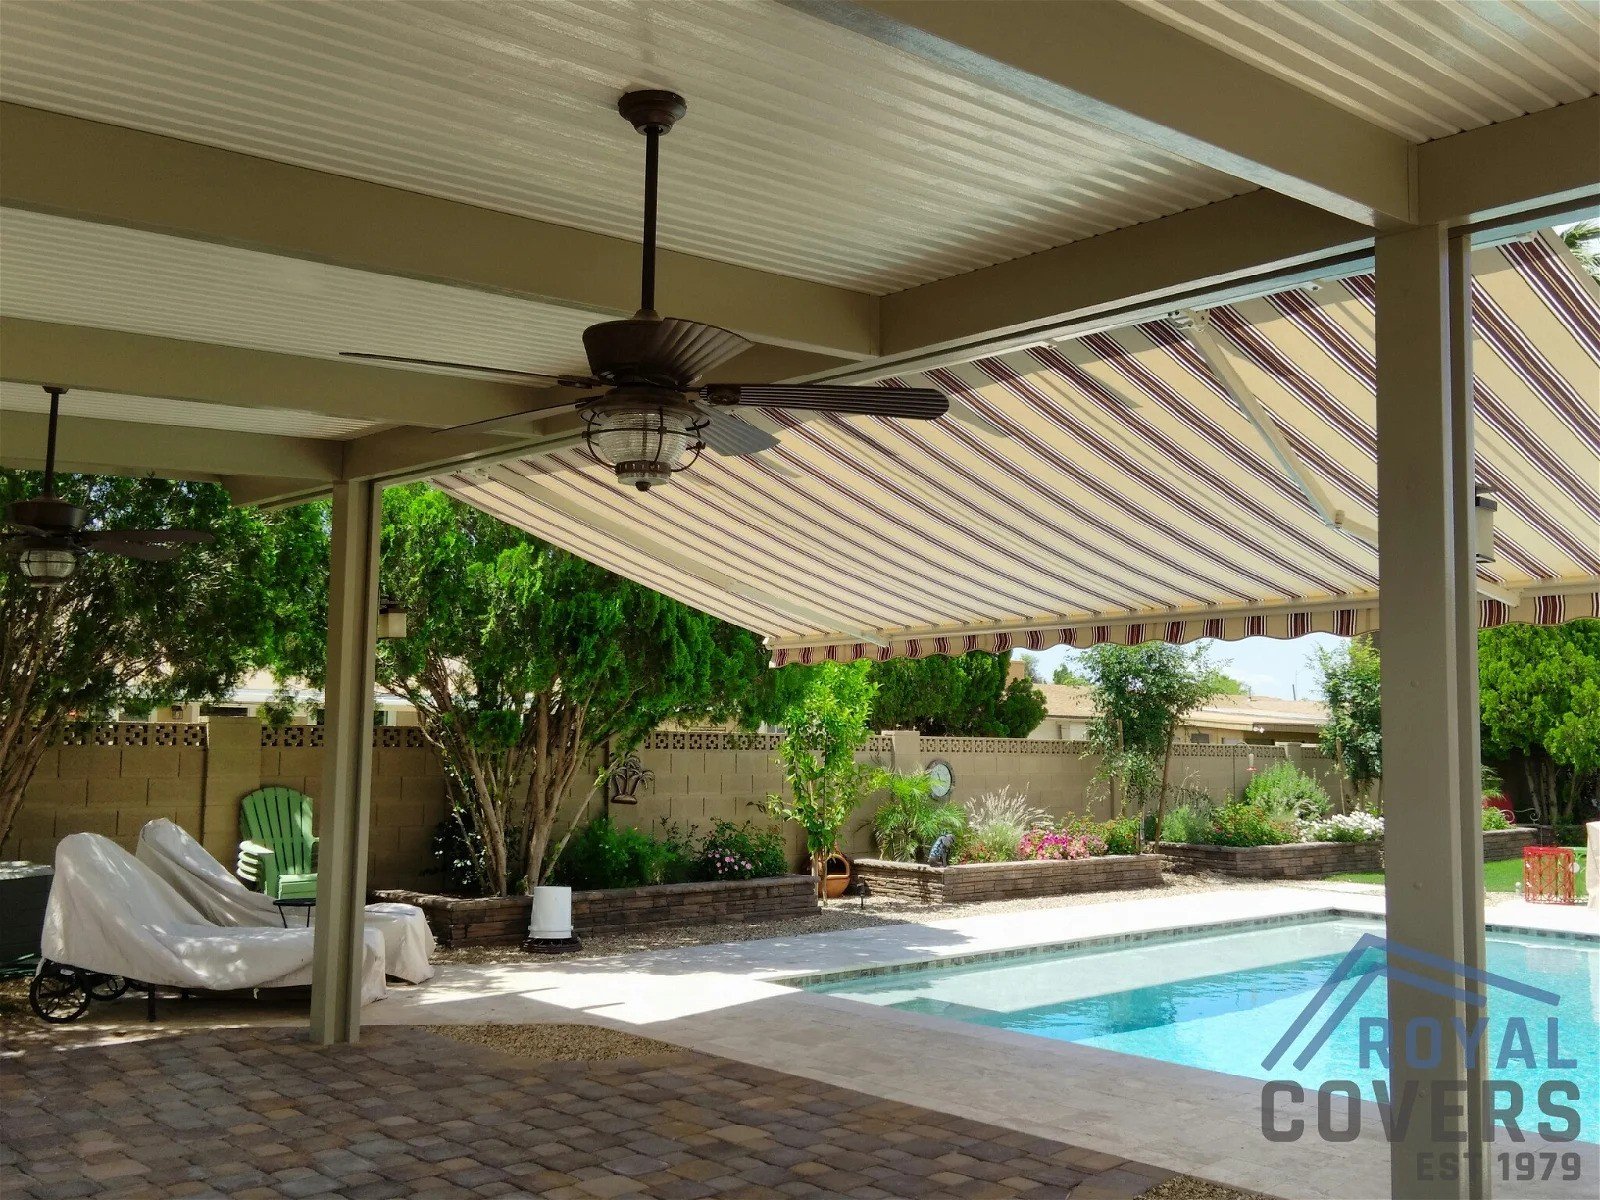 How to Install Ceiling Fan on Aluminum Patio